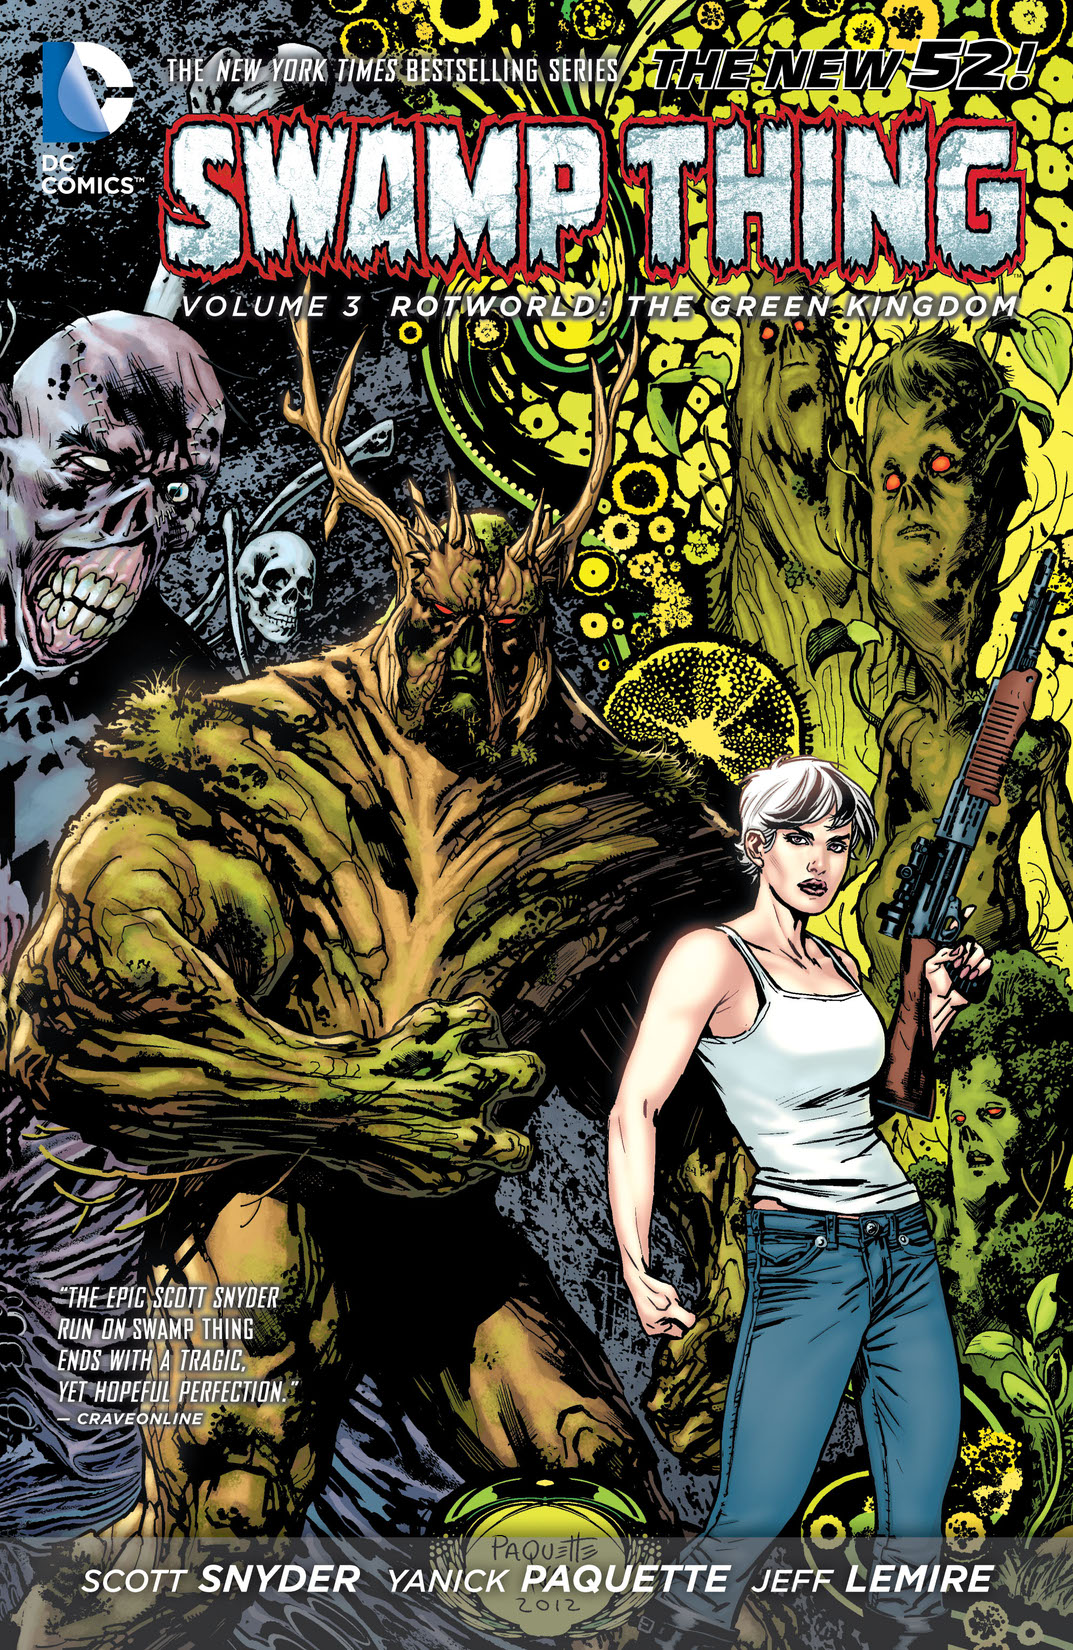 Swamp Thing Vol. 3: Rotworld: The Green Kingdom preview images